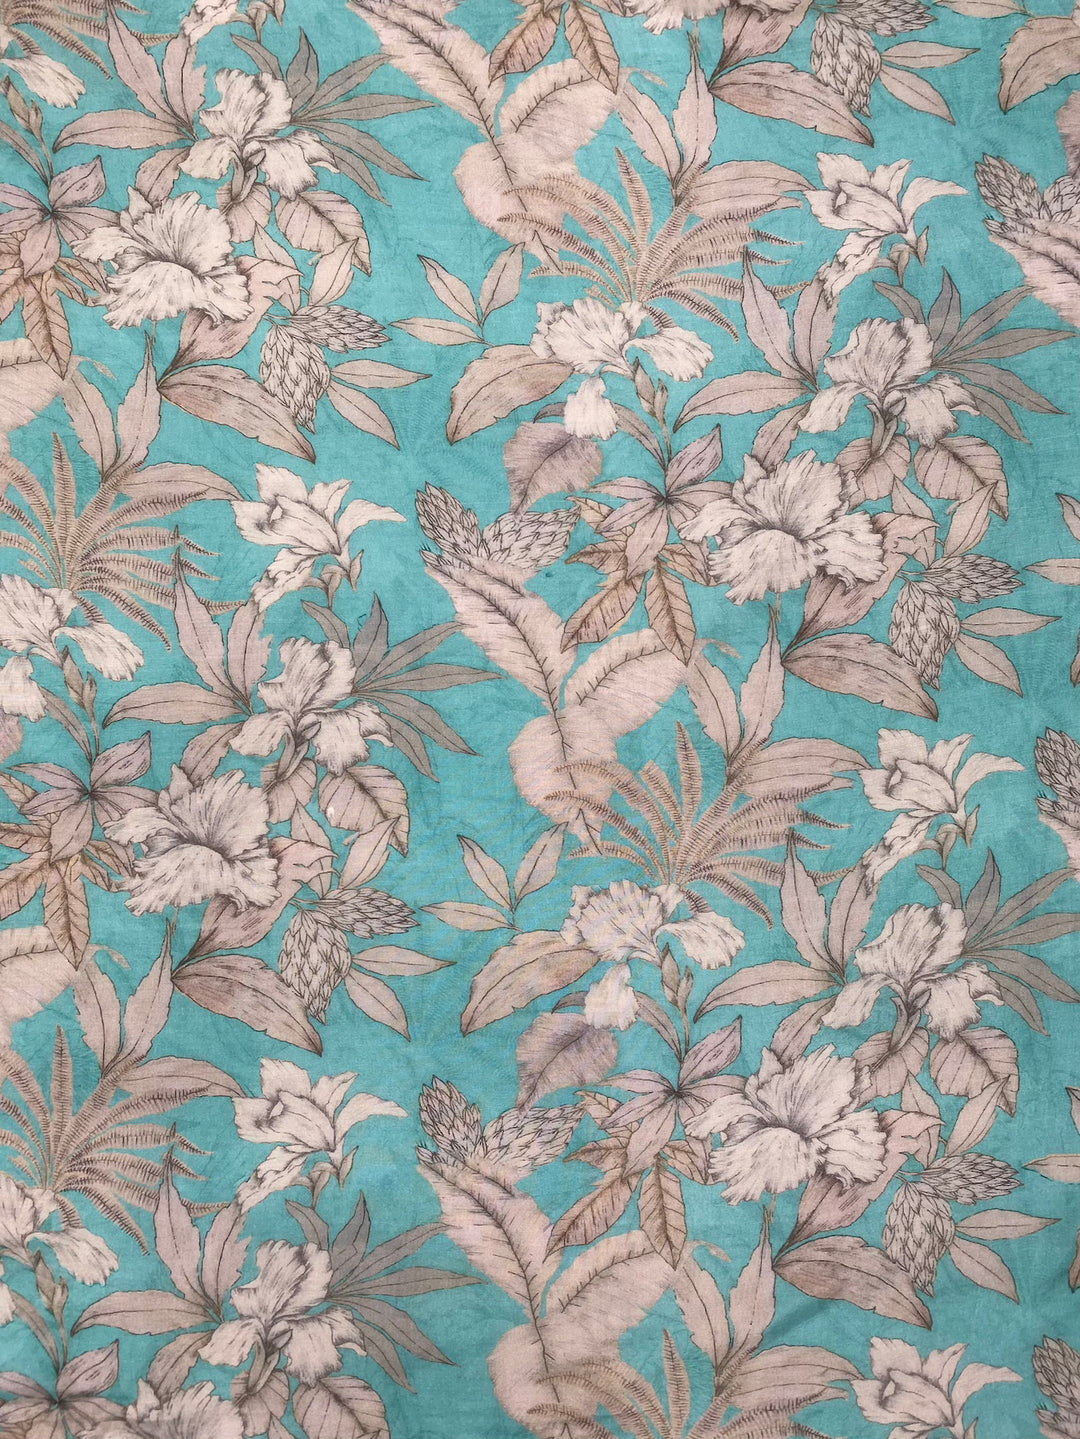 Printed Floral Muslin Cotton Fabric Blue